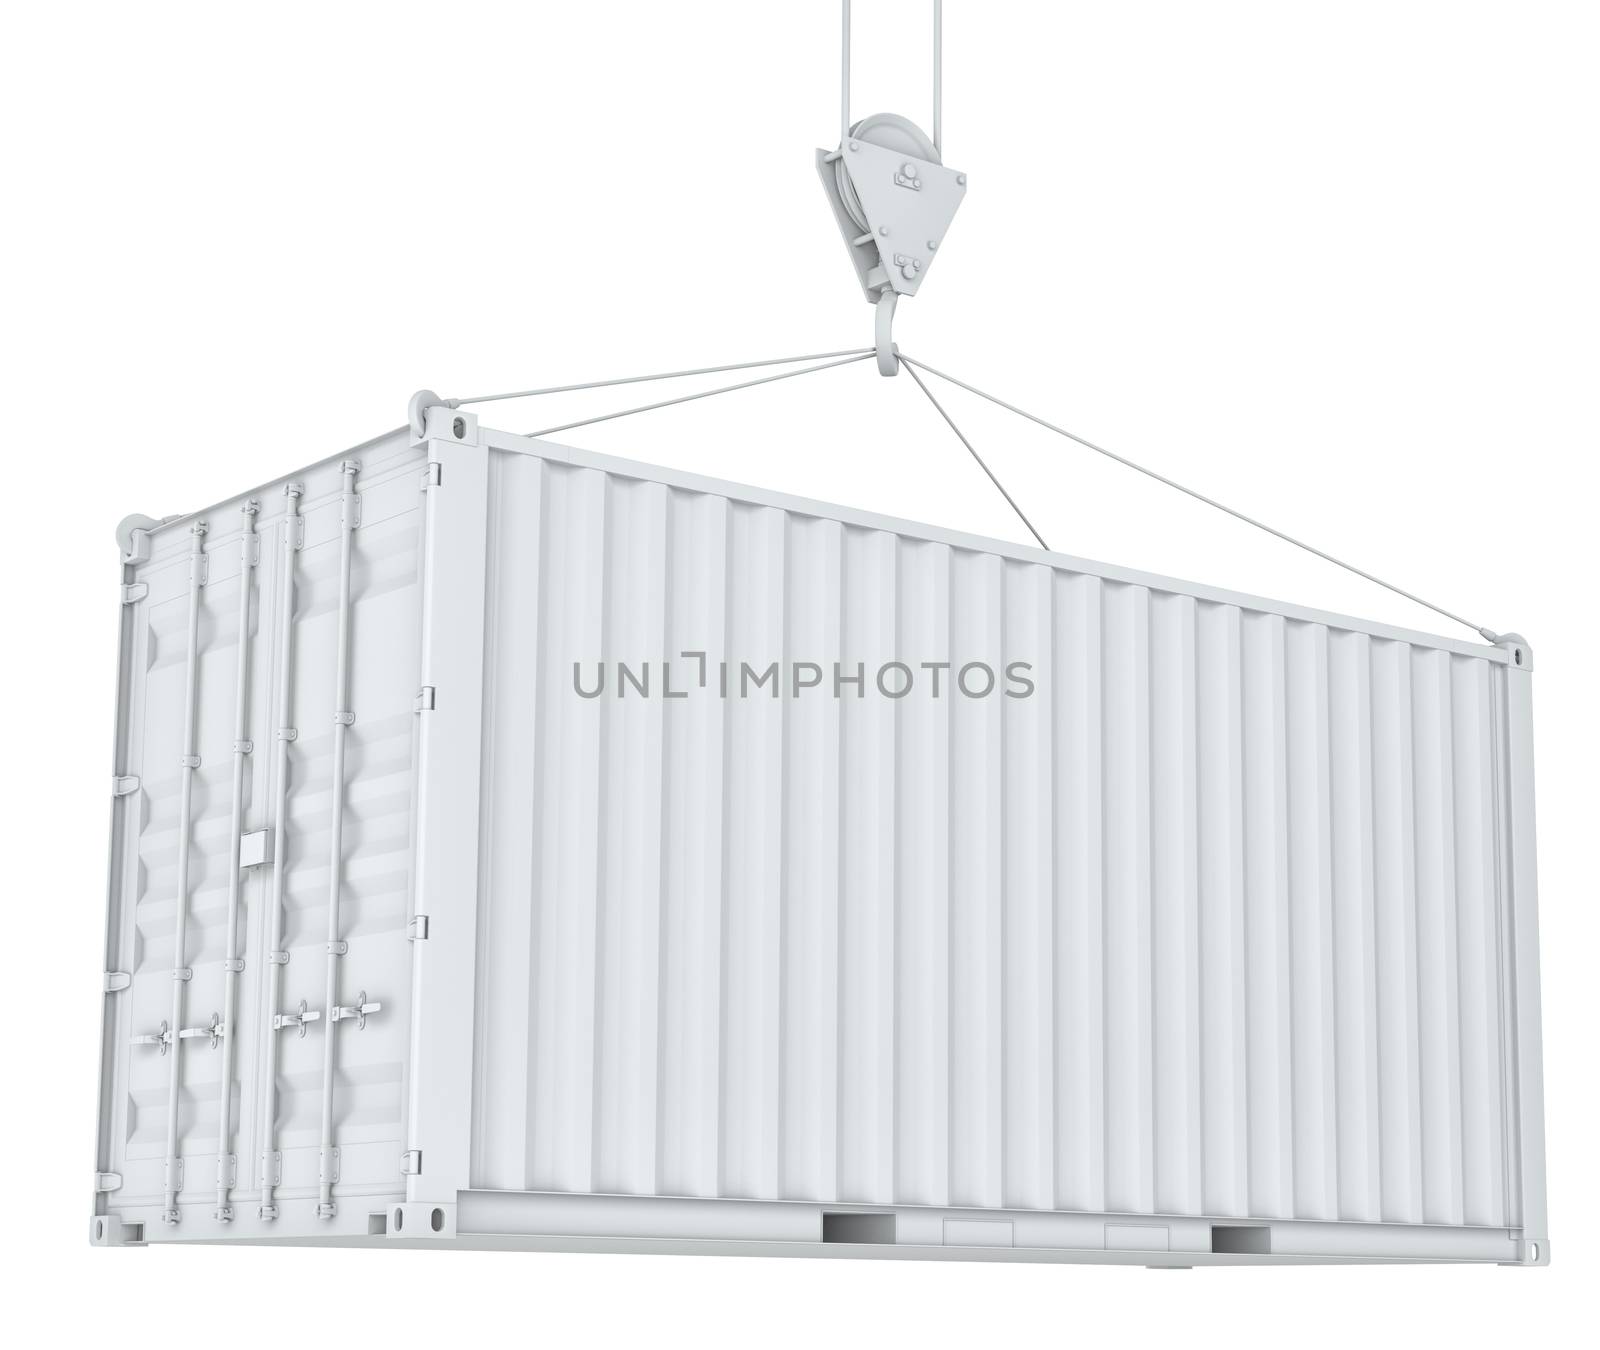 White cargo container on hook. Transportation concept. 3d rendering